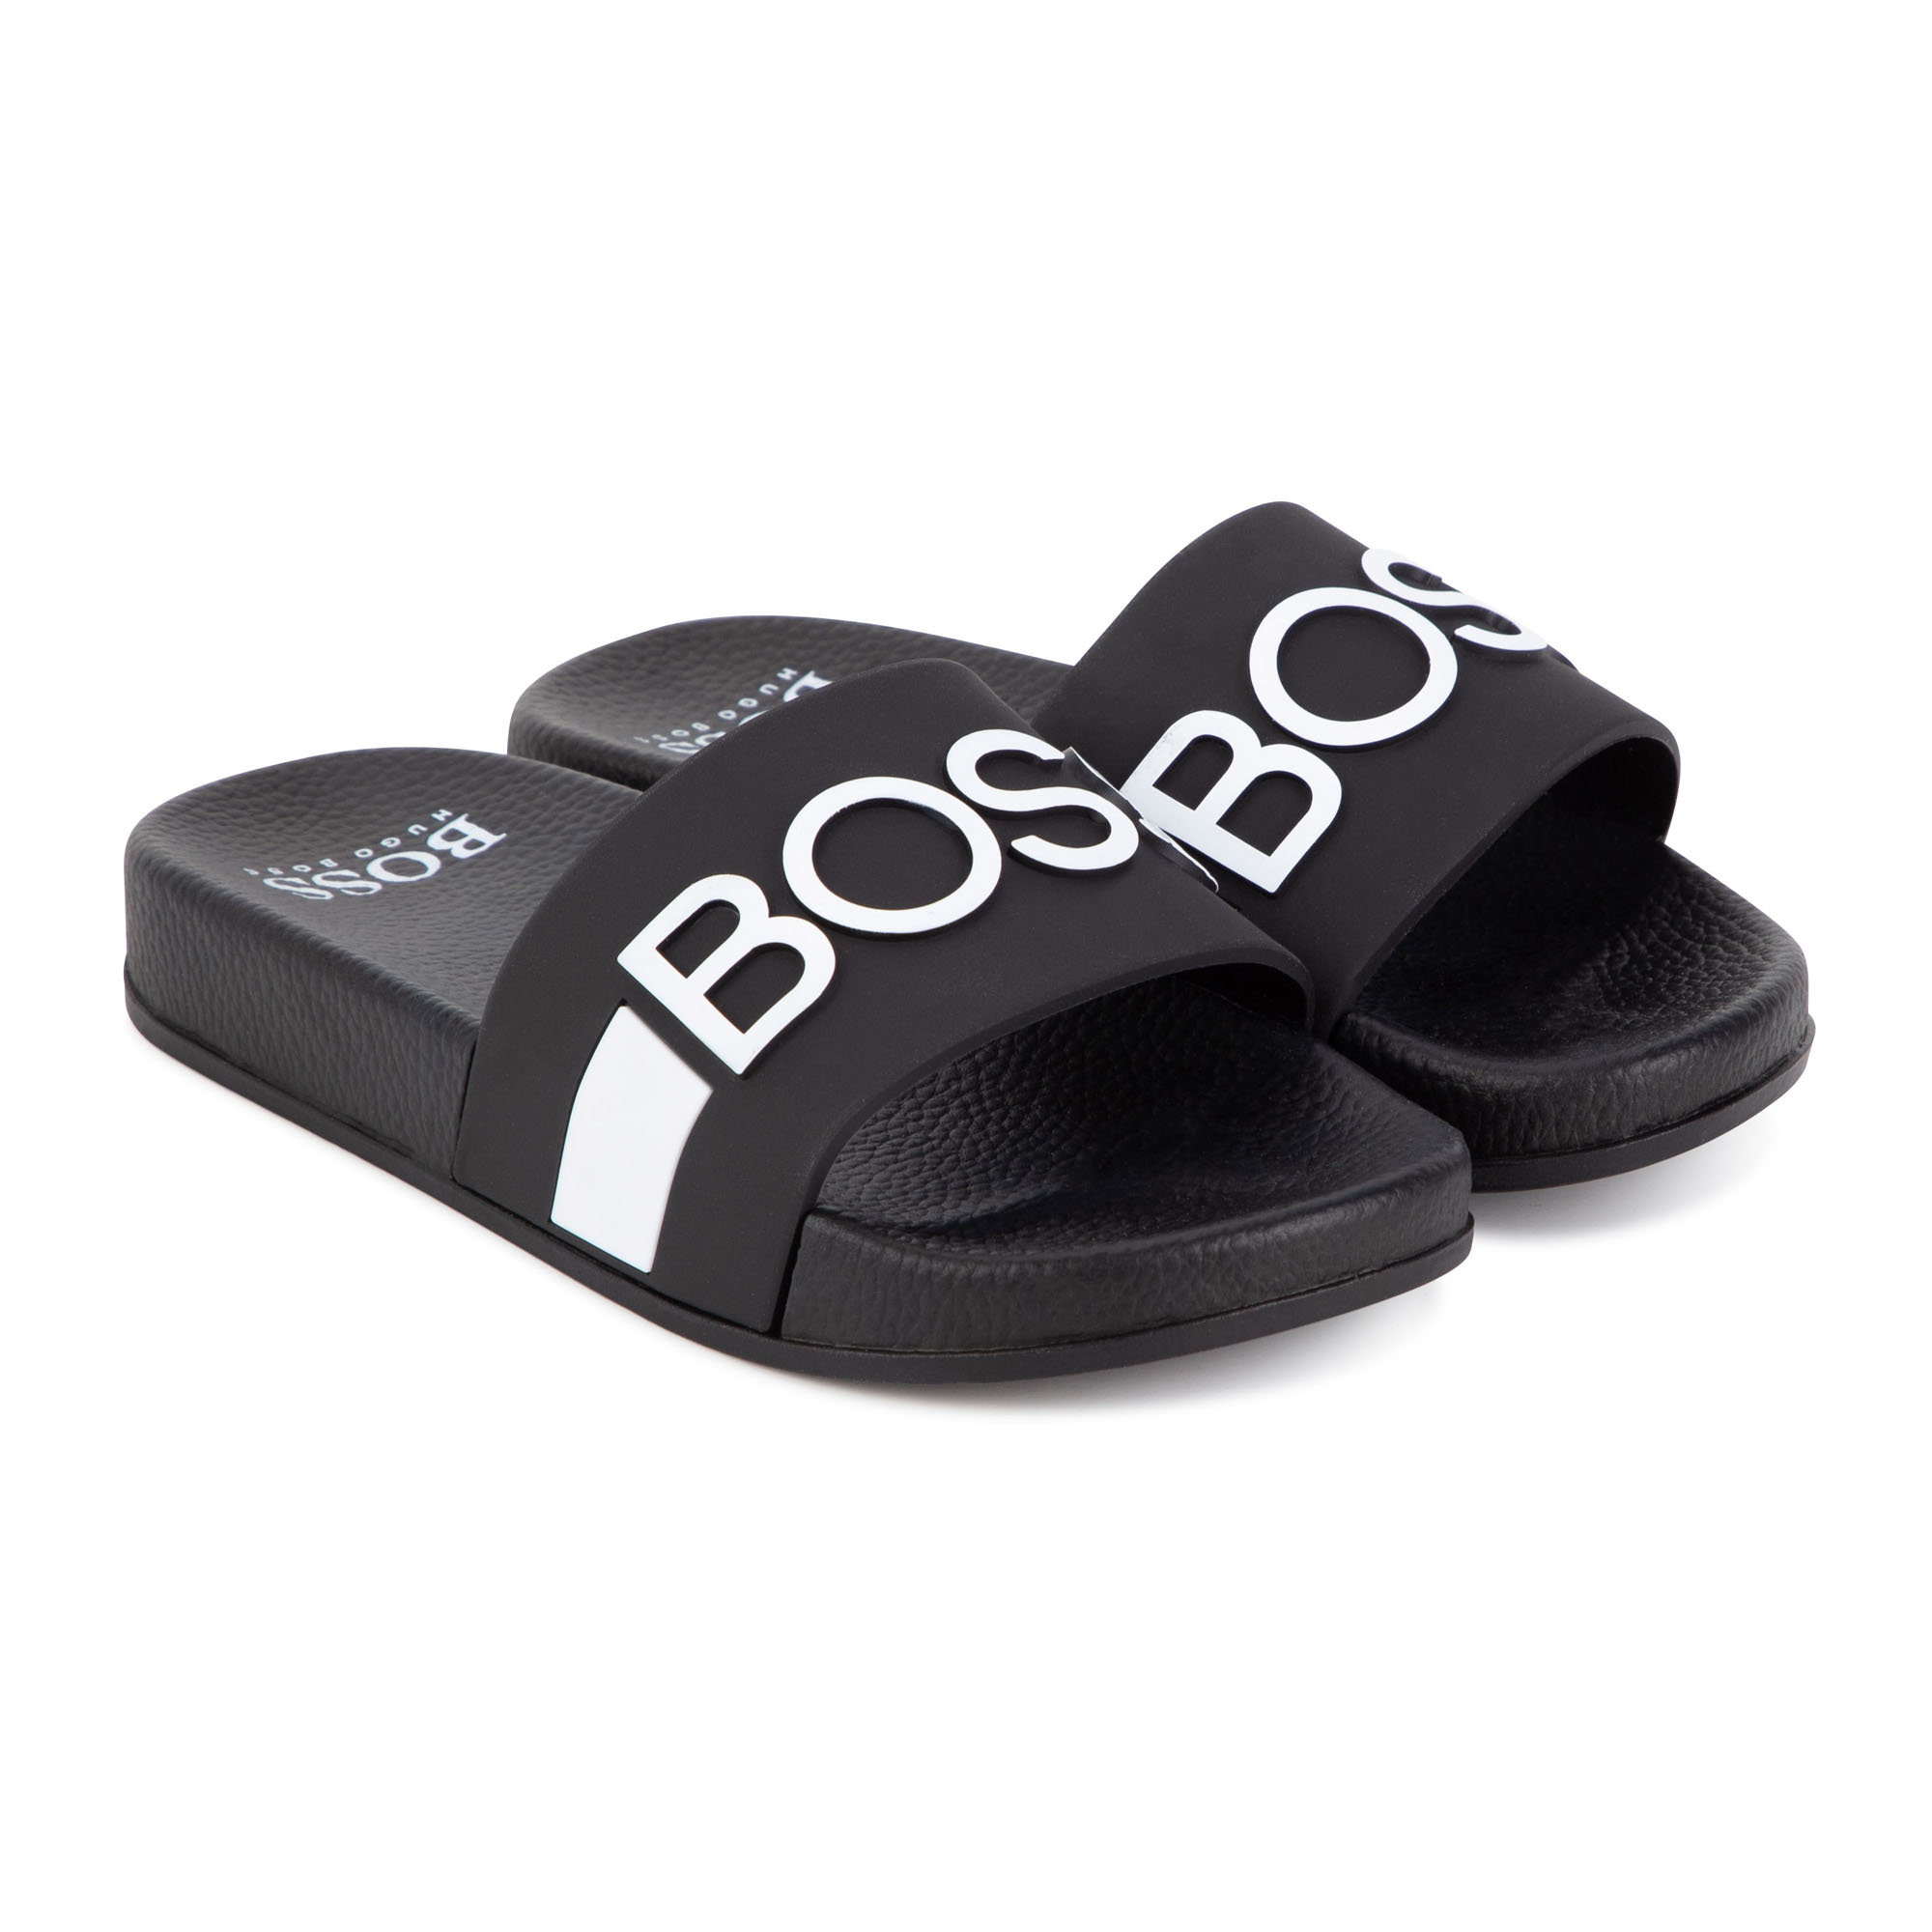 colorful PVC sandals BOSS for BOY